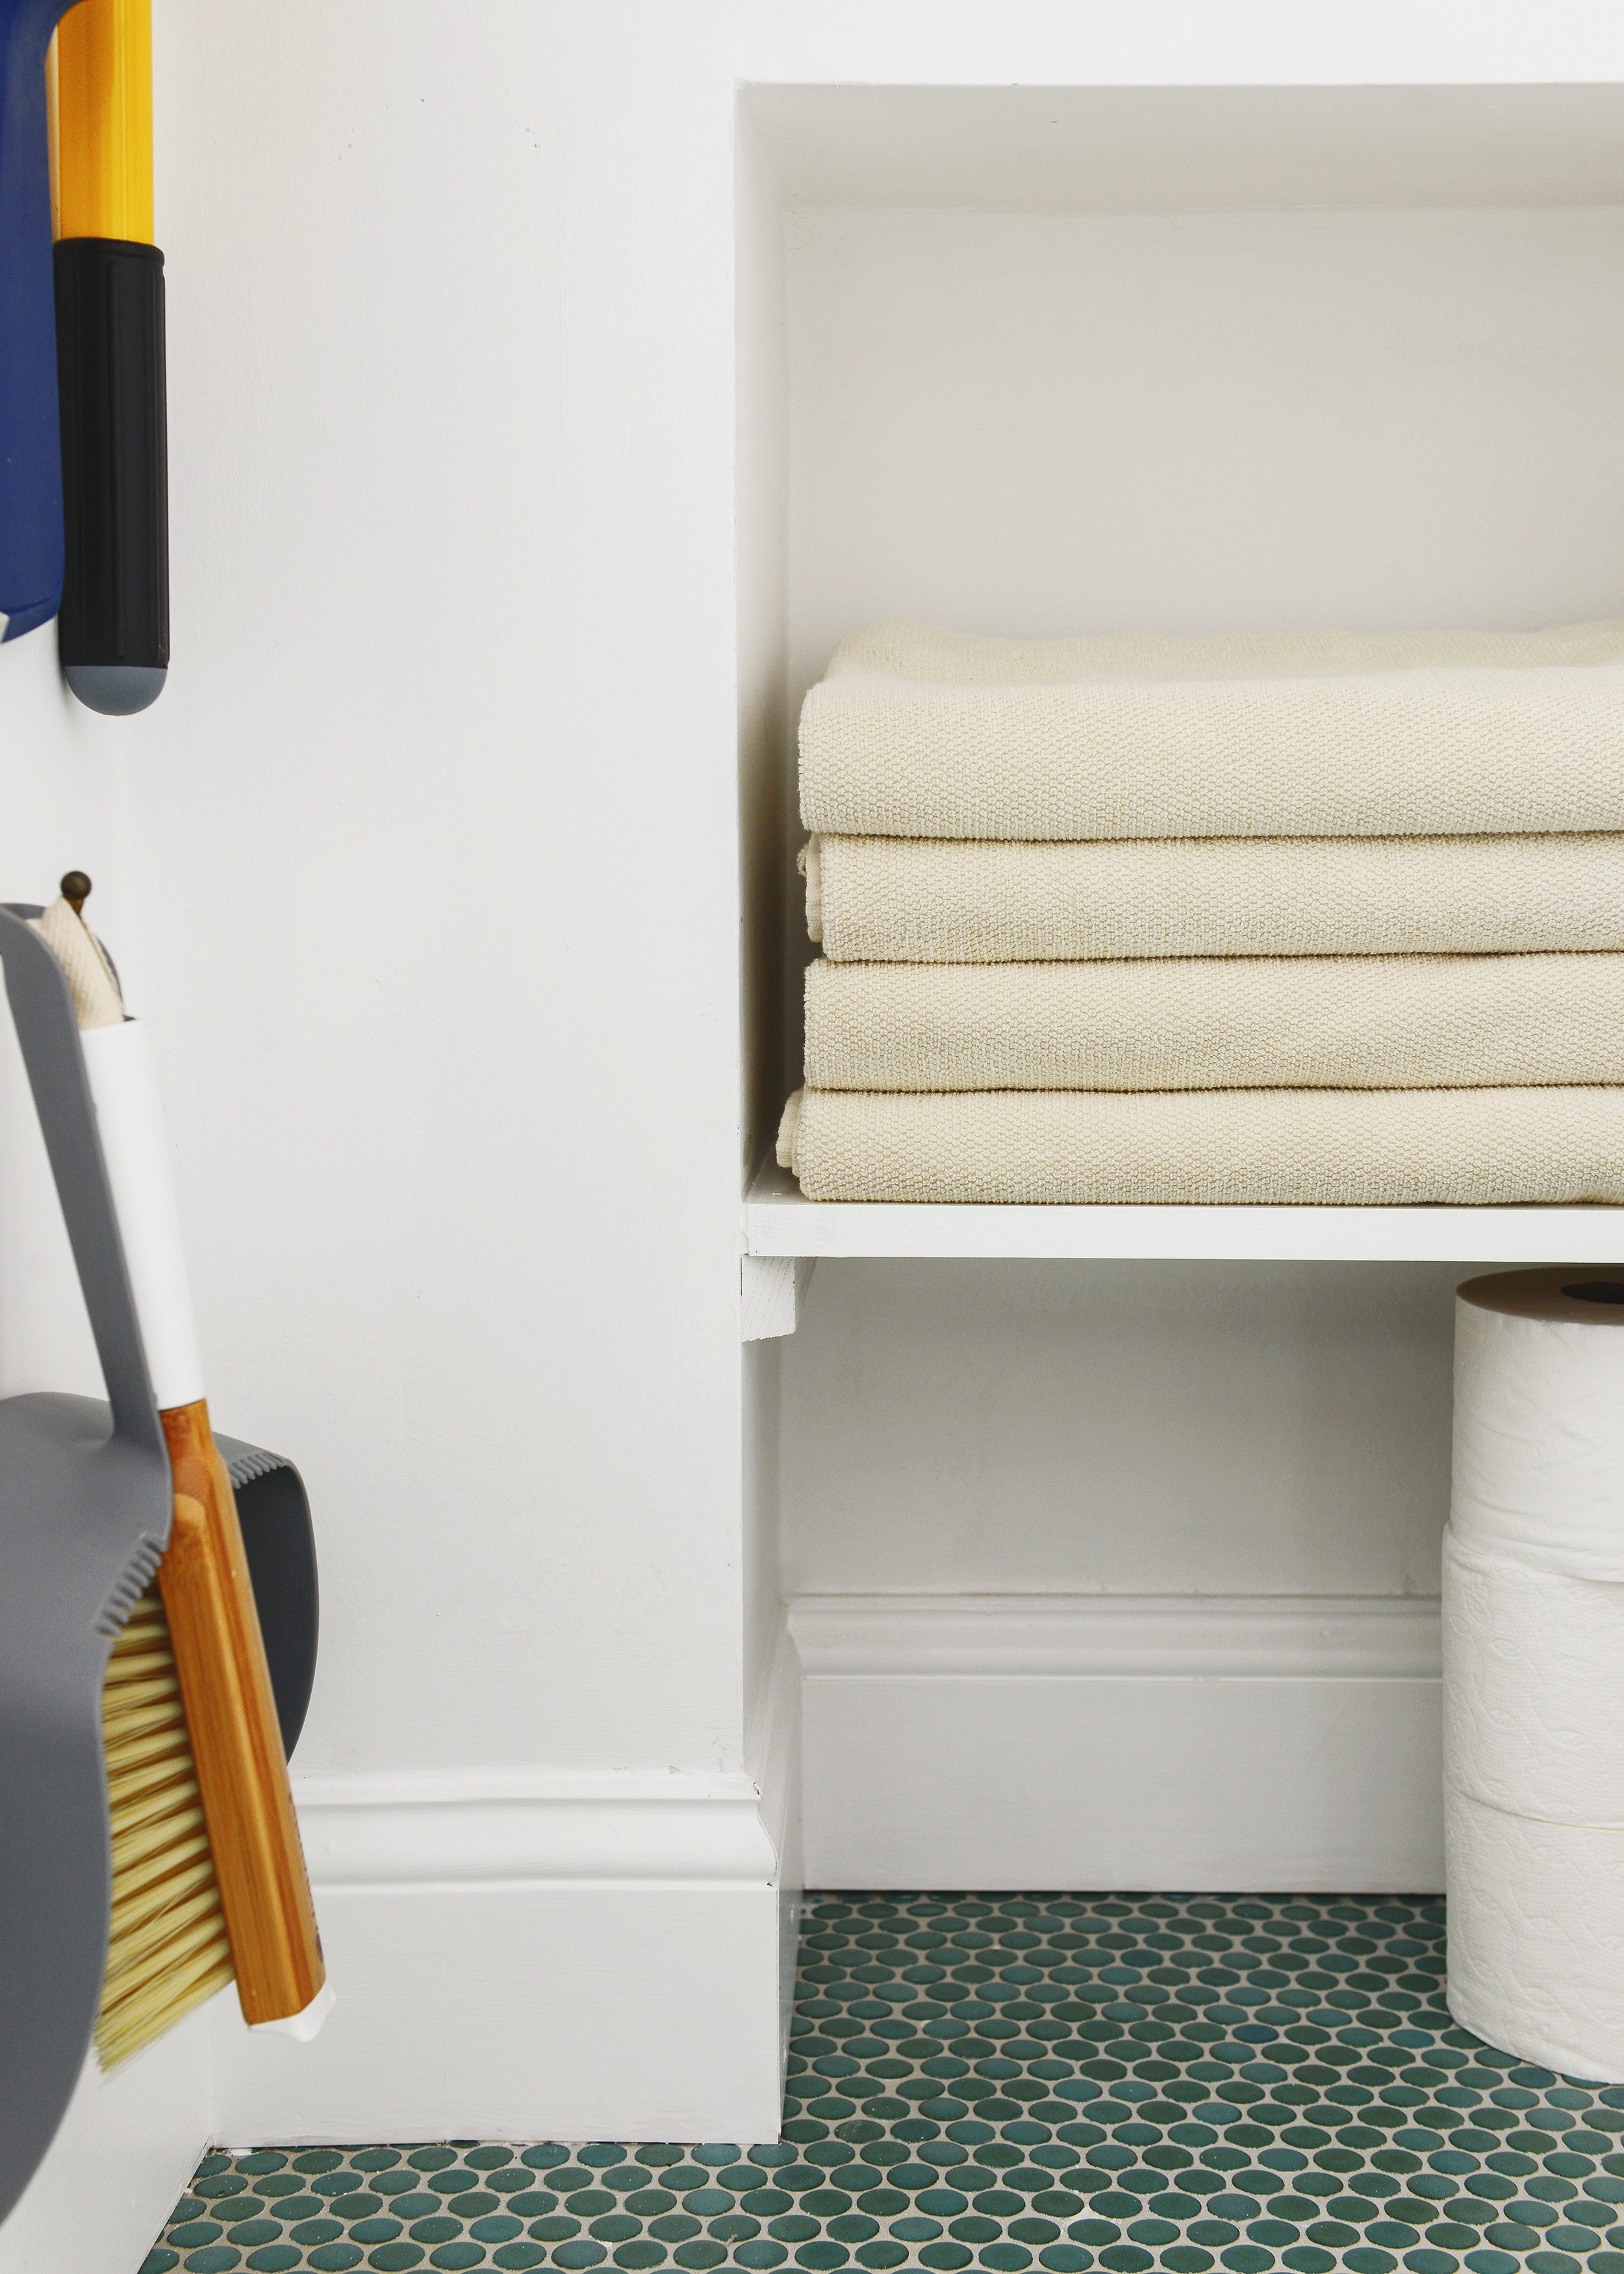 The finished interior of a small linen closet // via Yellow brick Home